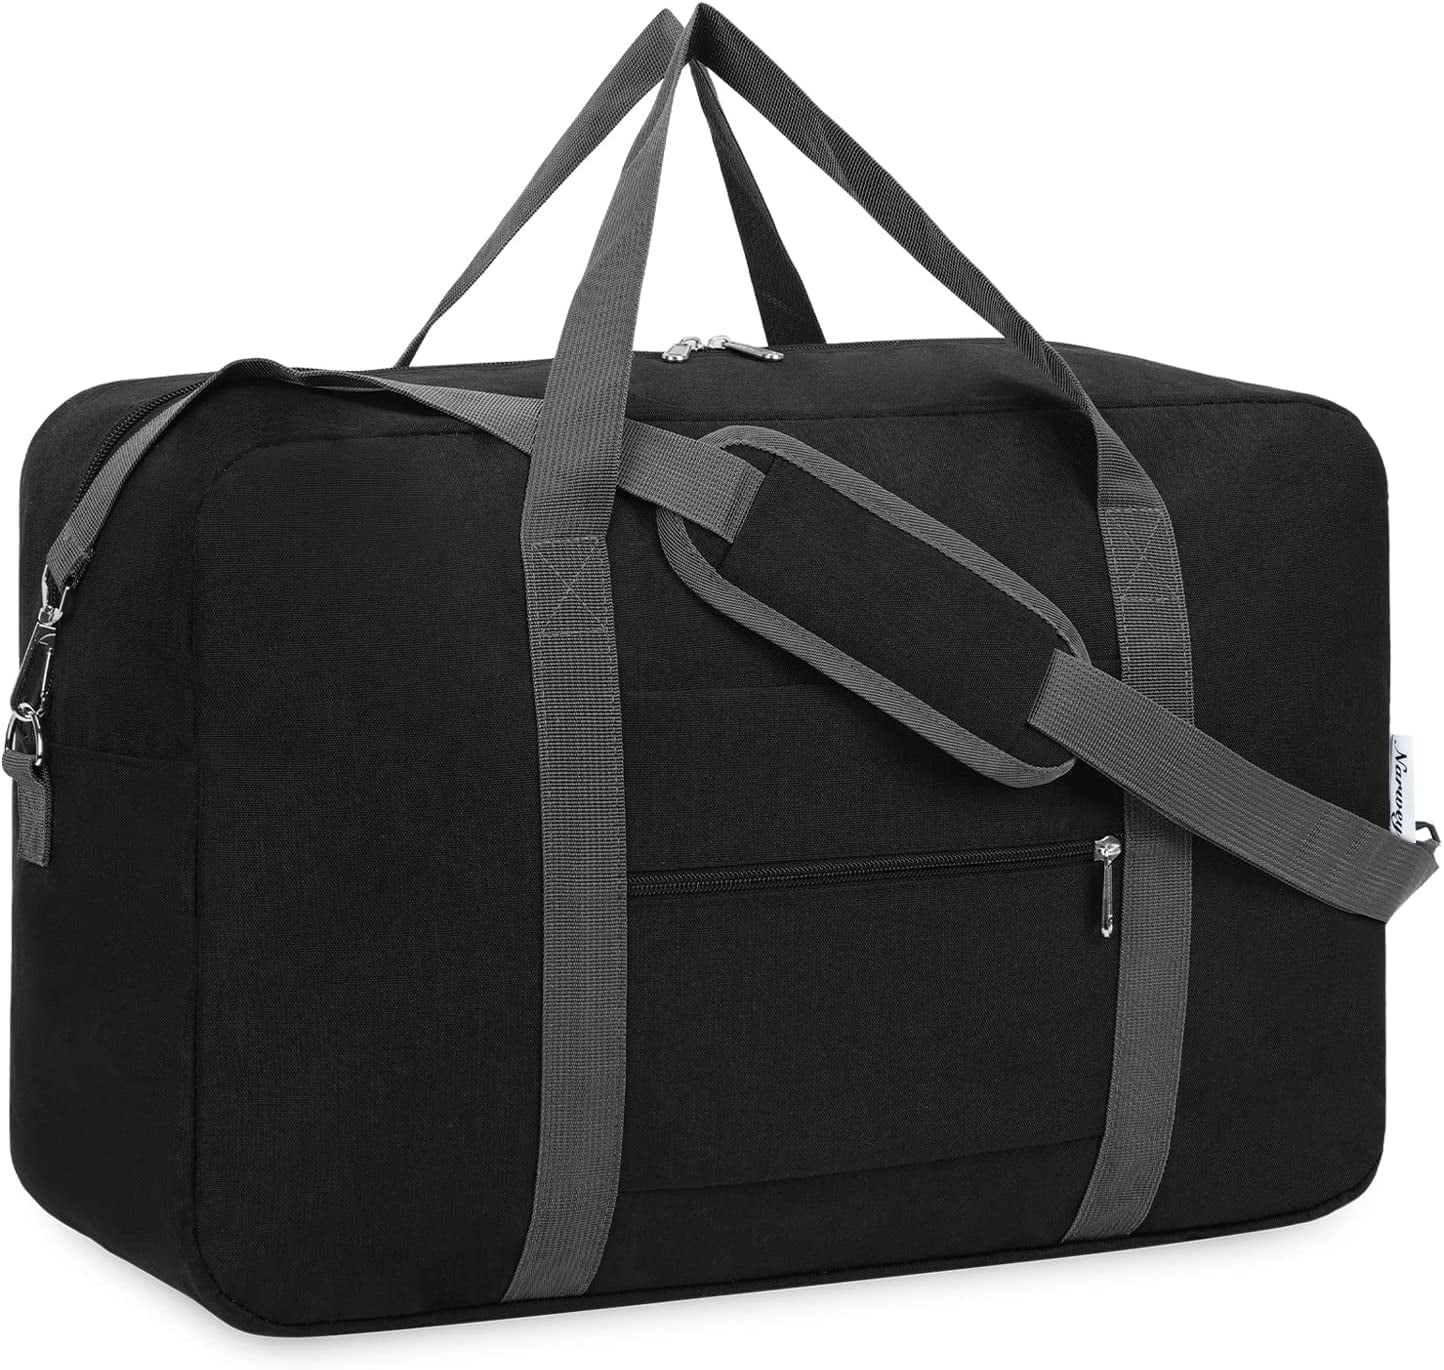 F.FETIVIN Personal item travel bag 18x14x8 for Spirit Airlines Lightweight carry  on duffle bag waterproof for Gym,Sports,Vacation, BLACK3, m : :  Clothing, Shoes & Accessories